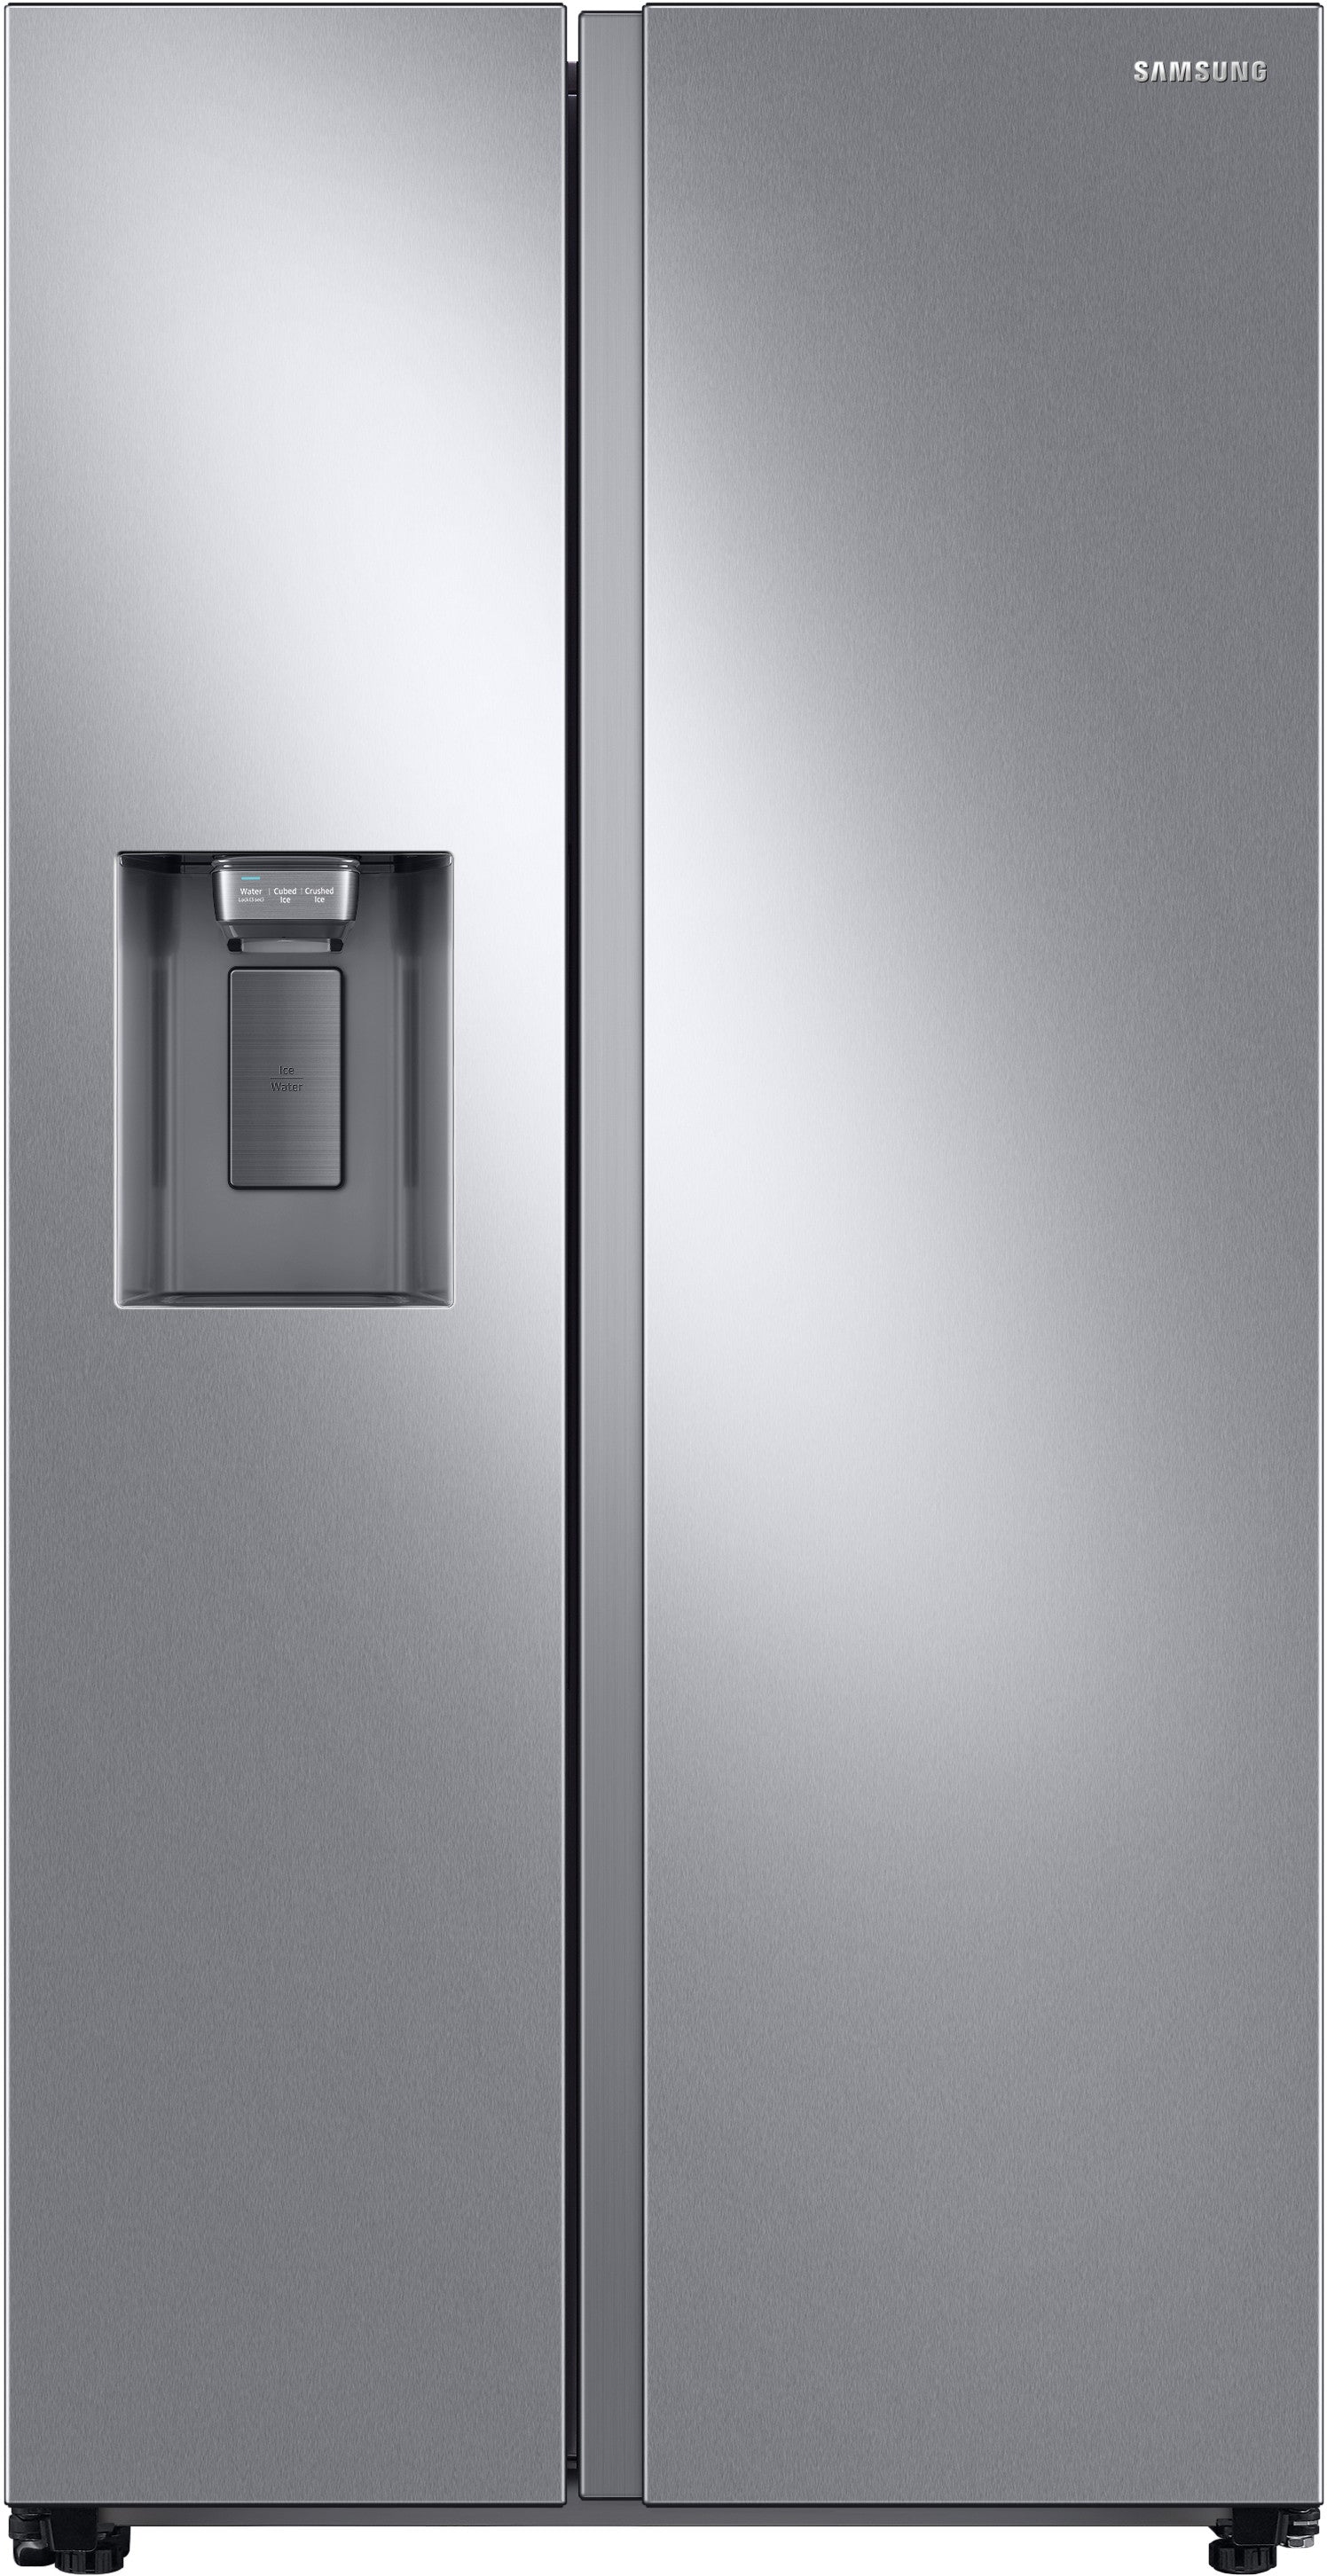 Samsung RS27T5200SR/AA 27.4 Cu. Ft. Large Capacity Side-by-side Refrigerator - Samsung Parts USA